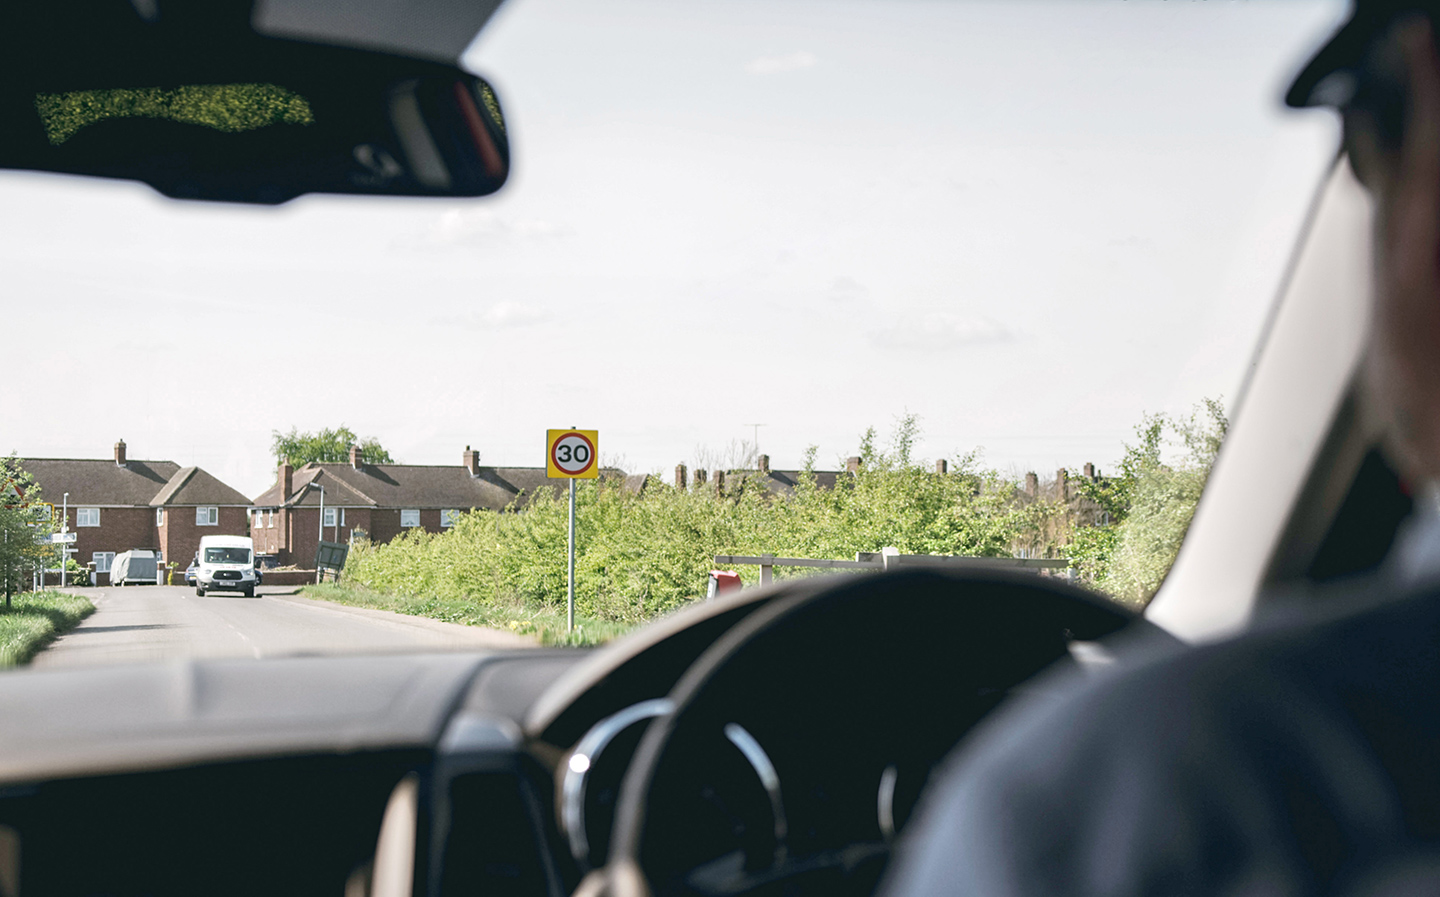 DVLA encourages road users to regularly take the number plate eyesight test